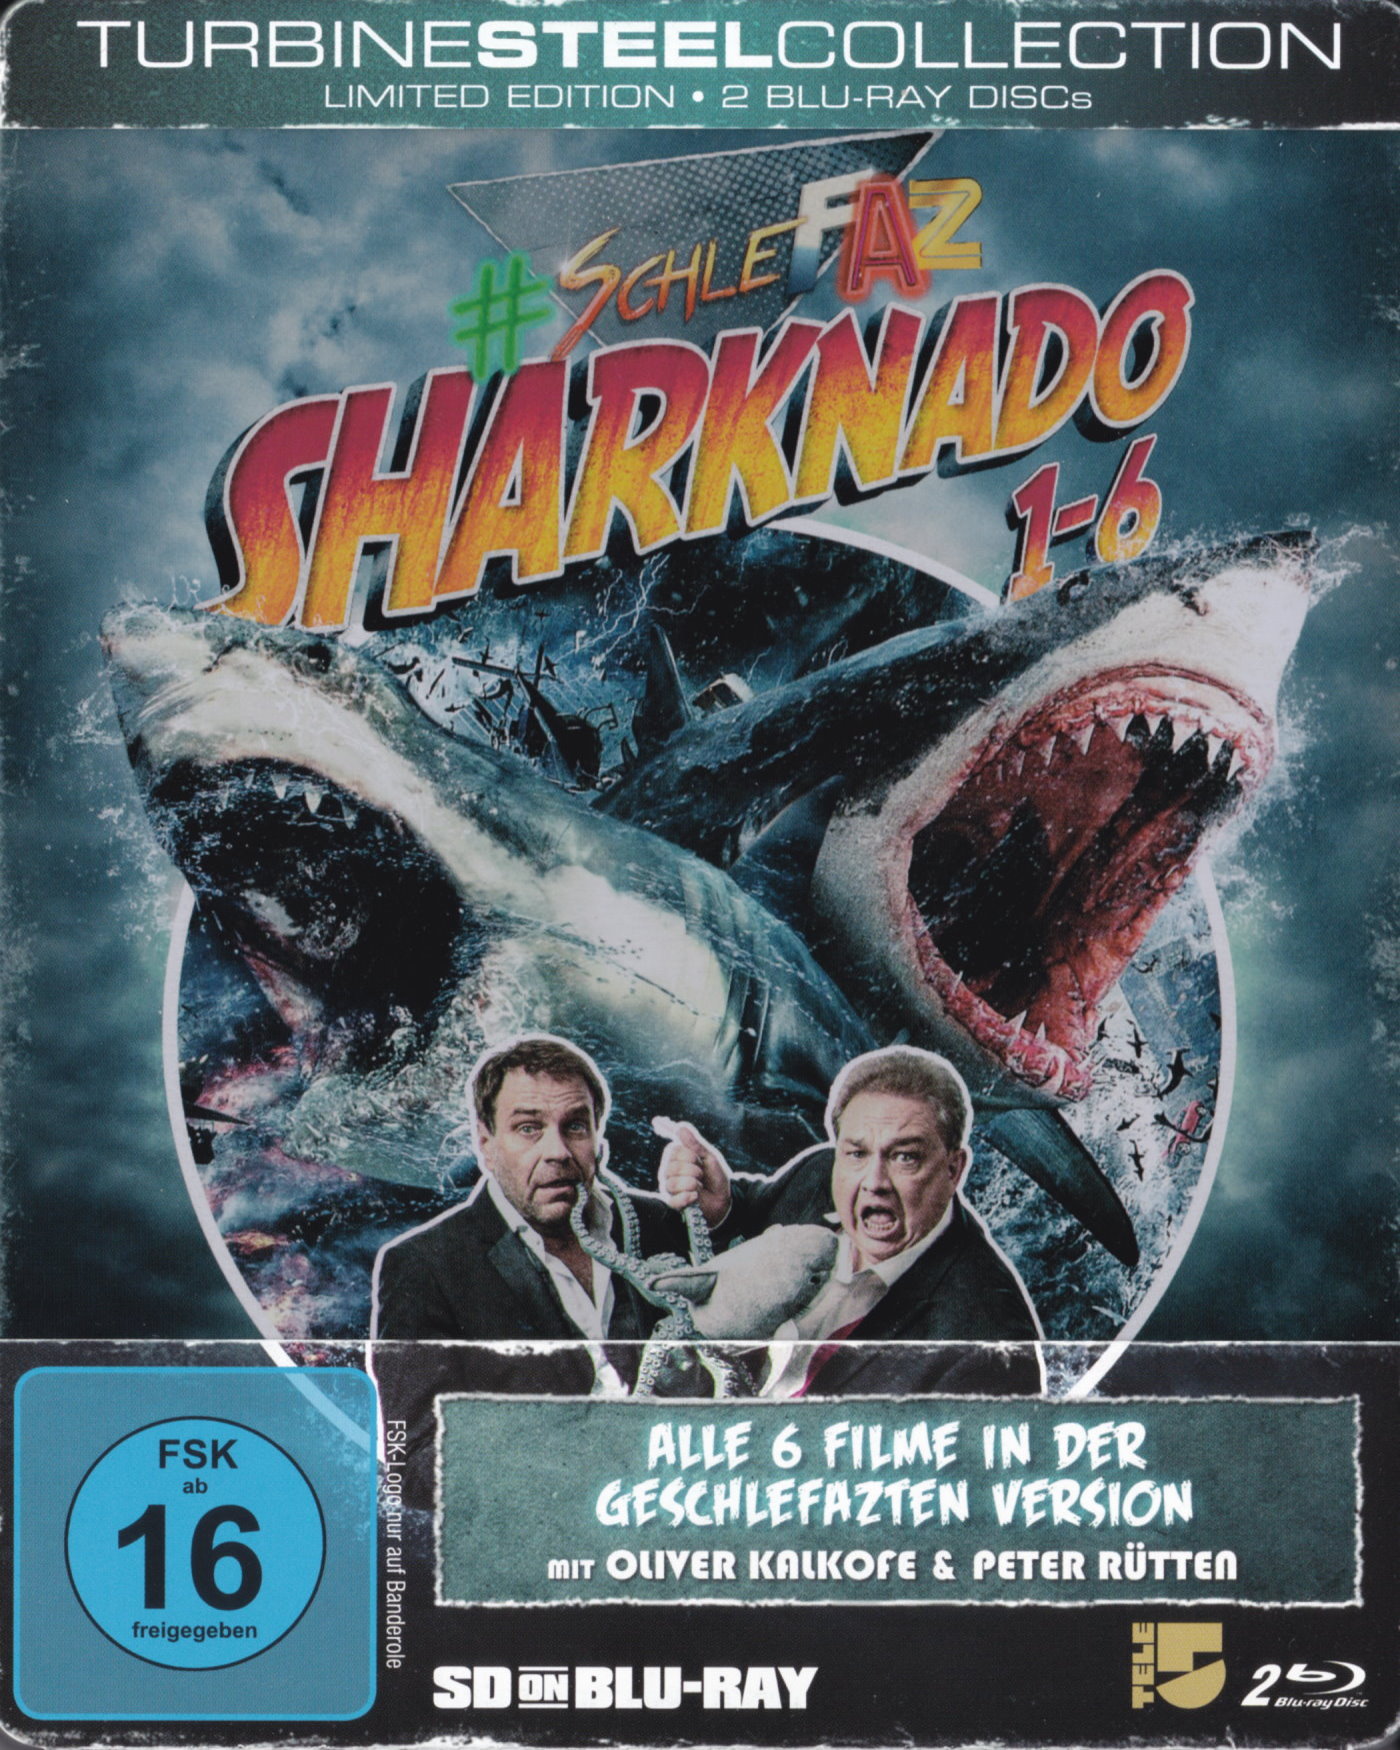 Cover - Sharknado 2 - The Second One.jpg